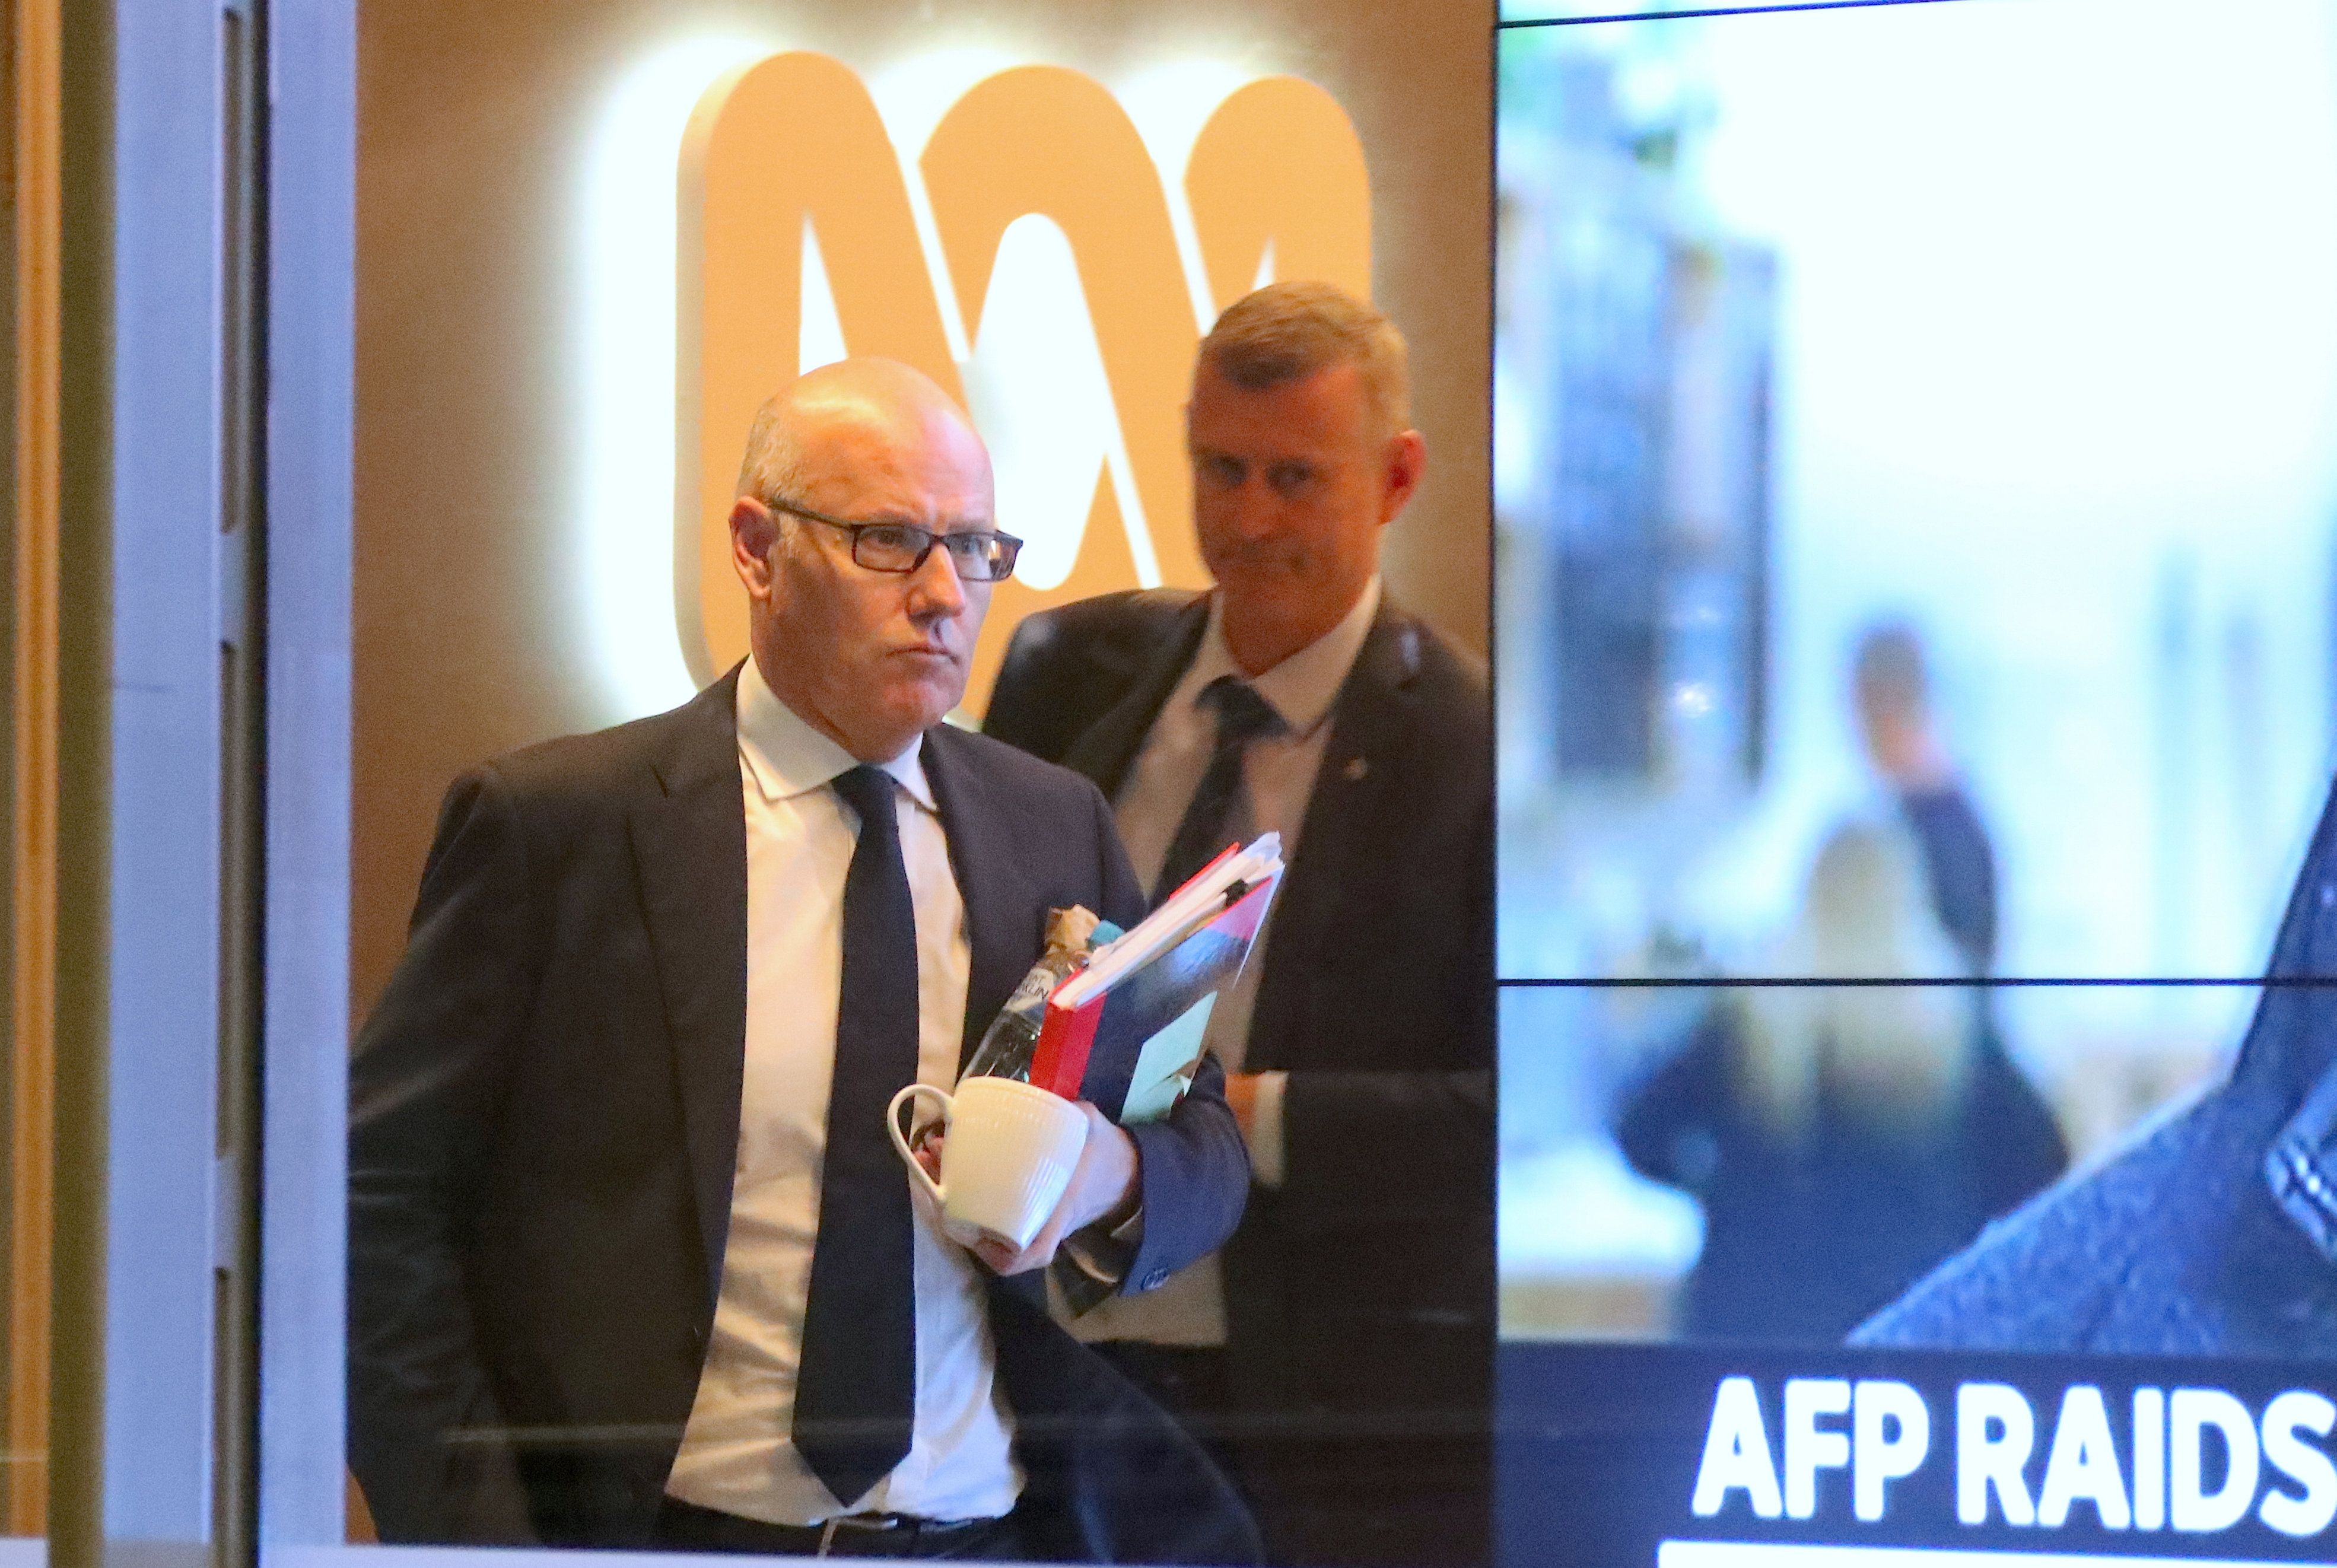 John Lyons (left), Executive Editor of ABC News, is followed by an AFP officer as they walk out the main entrance to the ABC building in Sydney.